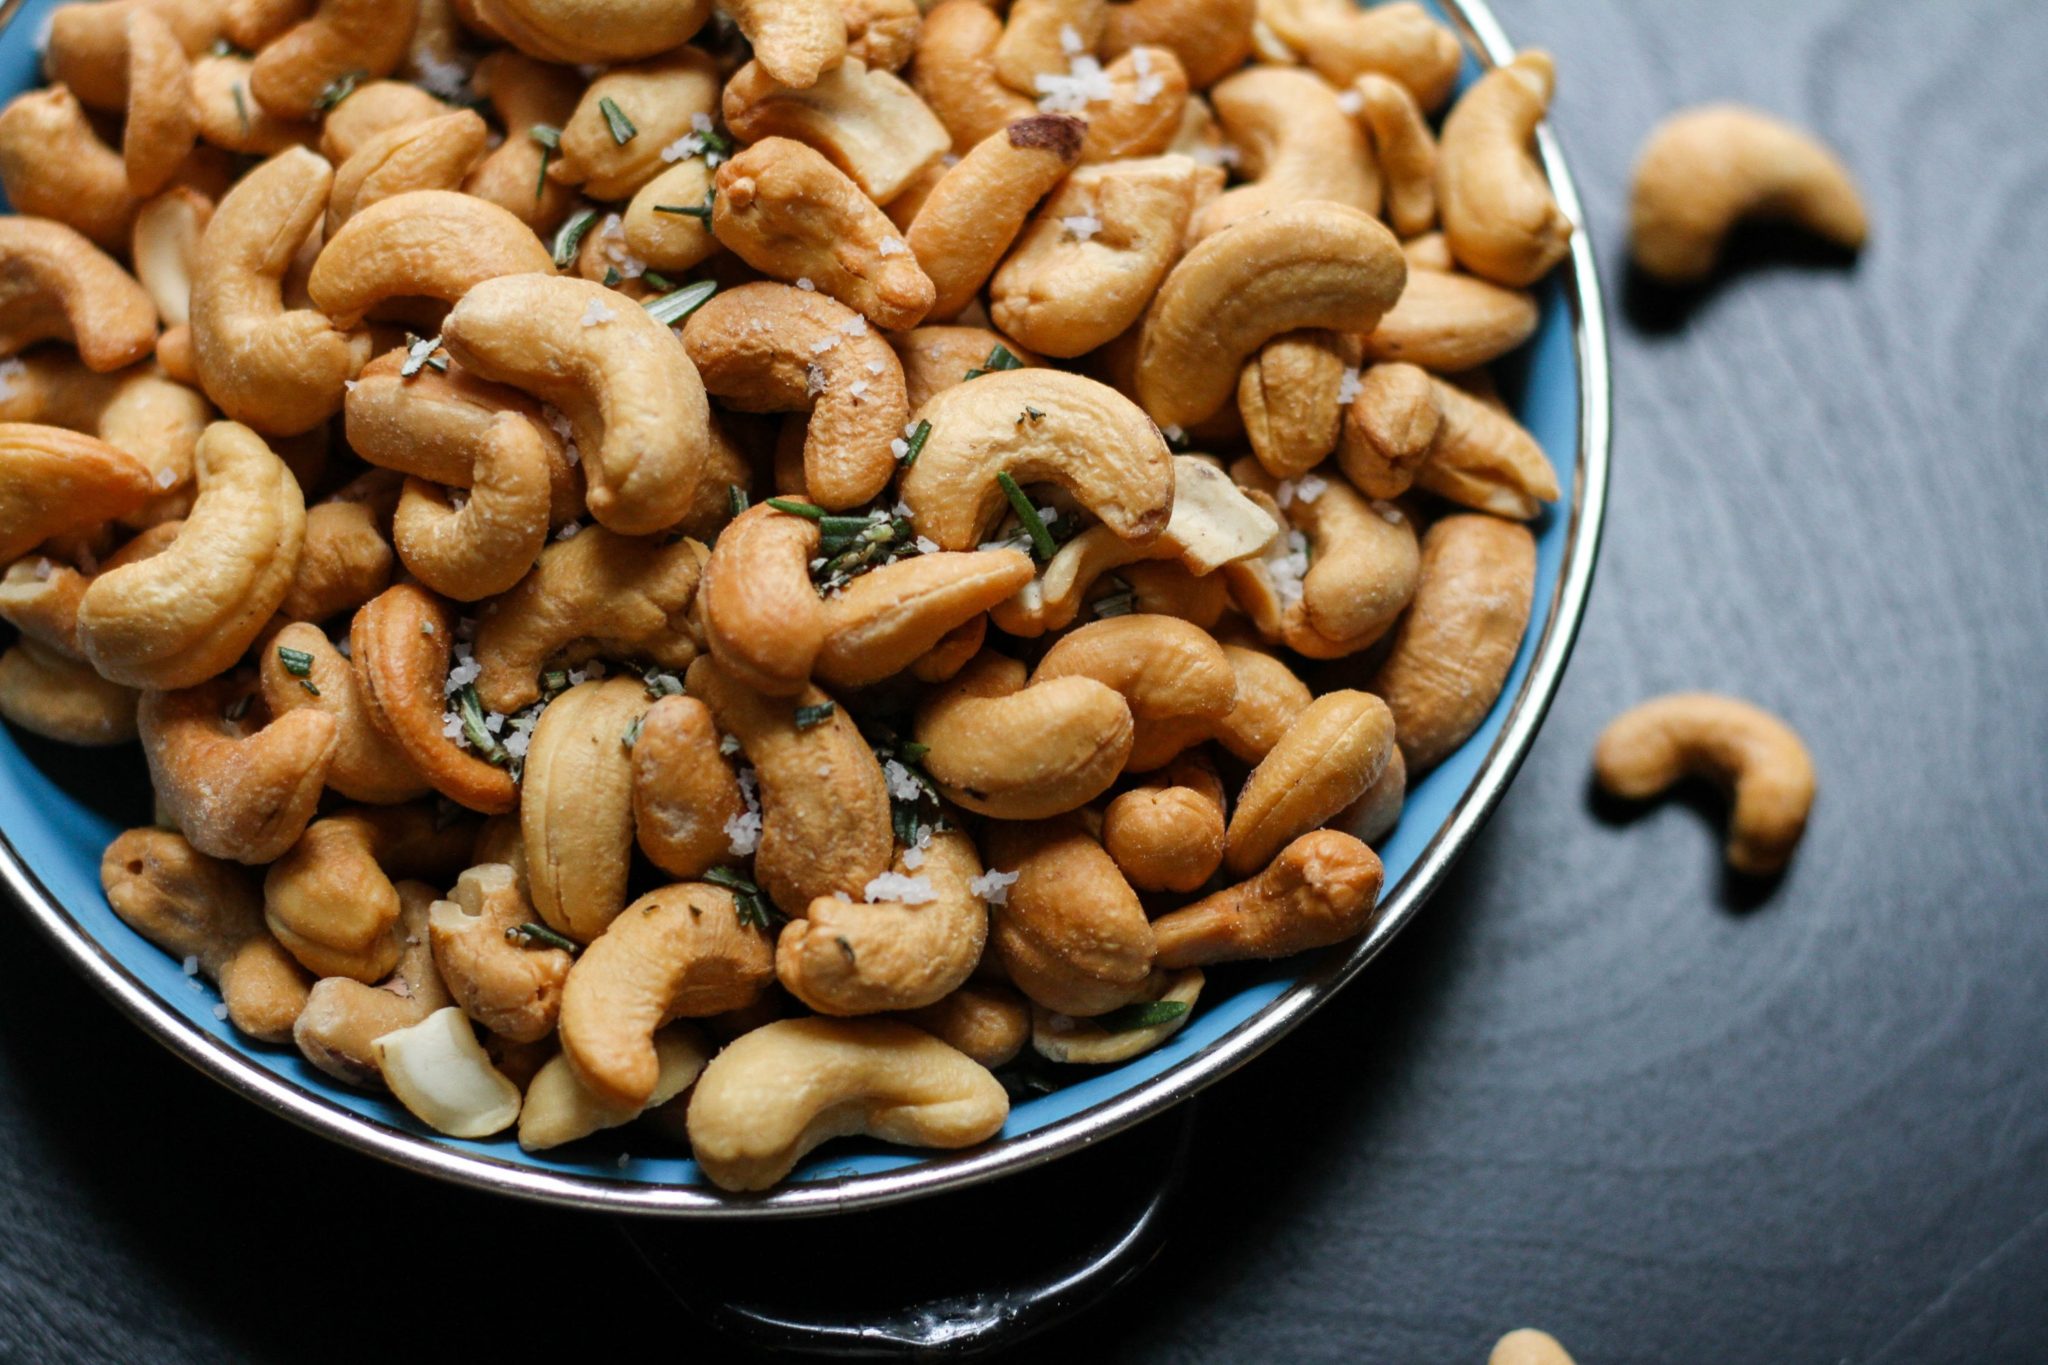 Cashew nuts are rich in magnesium